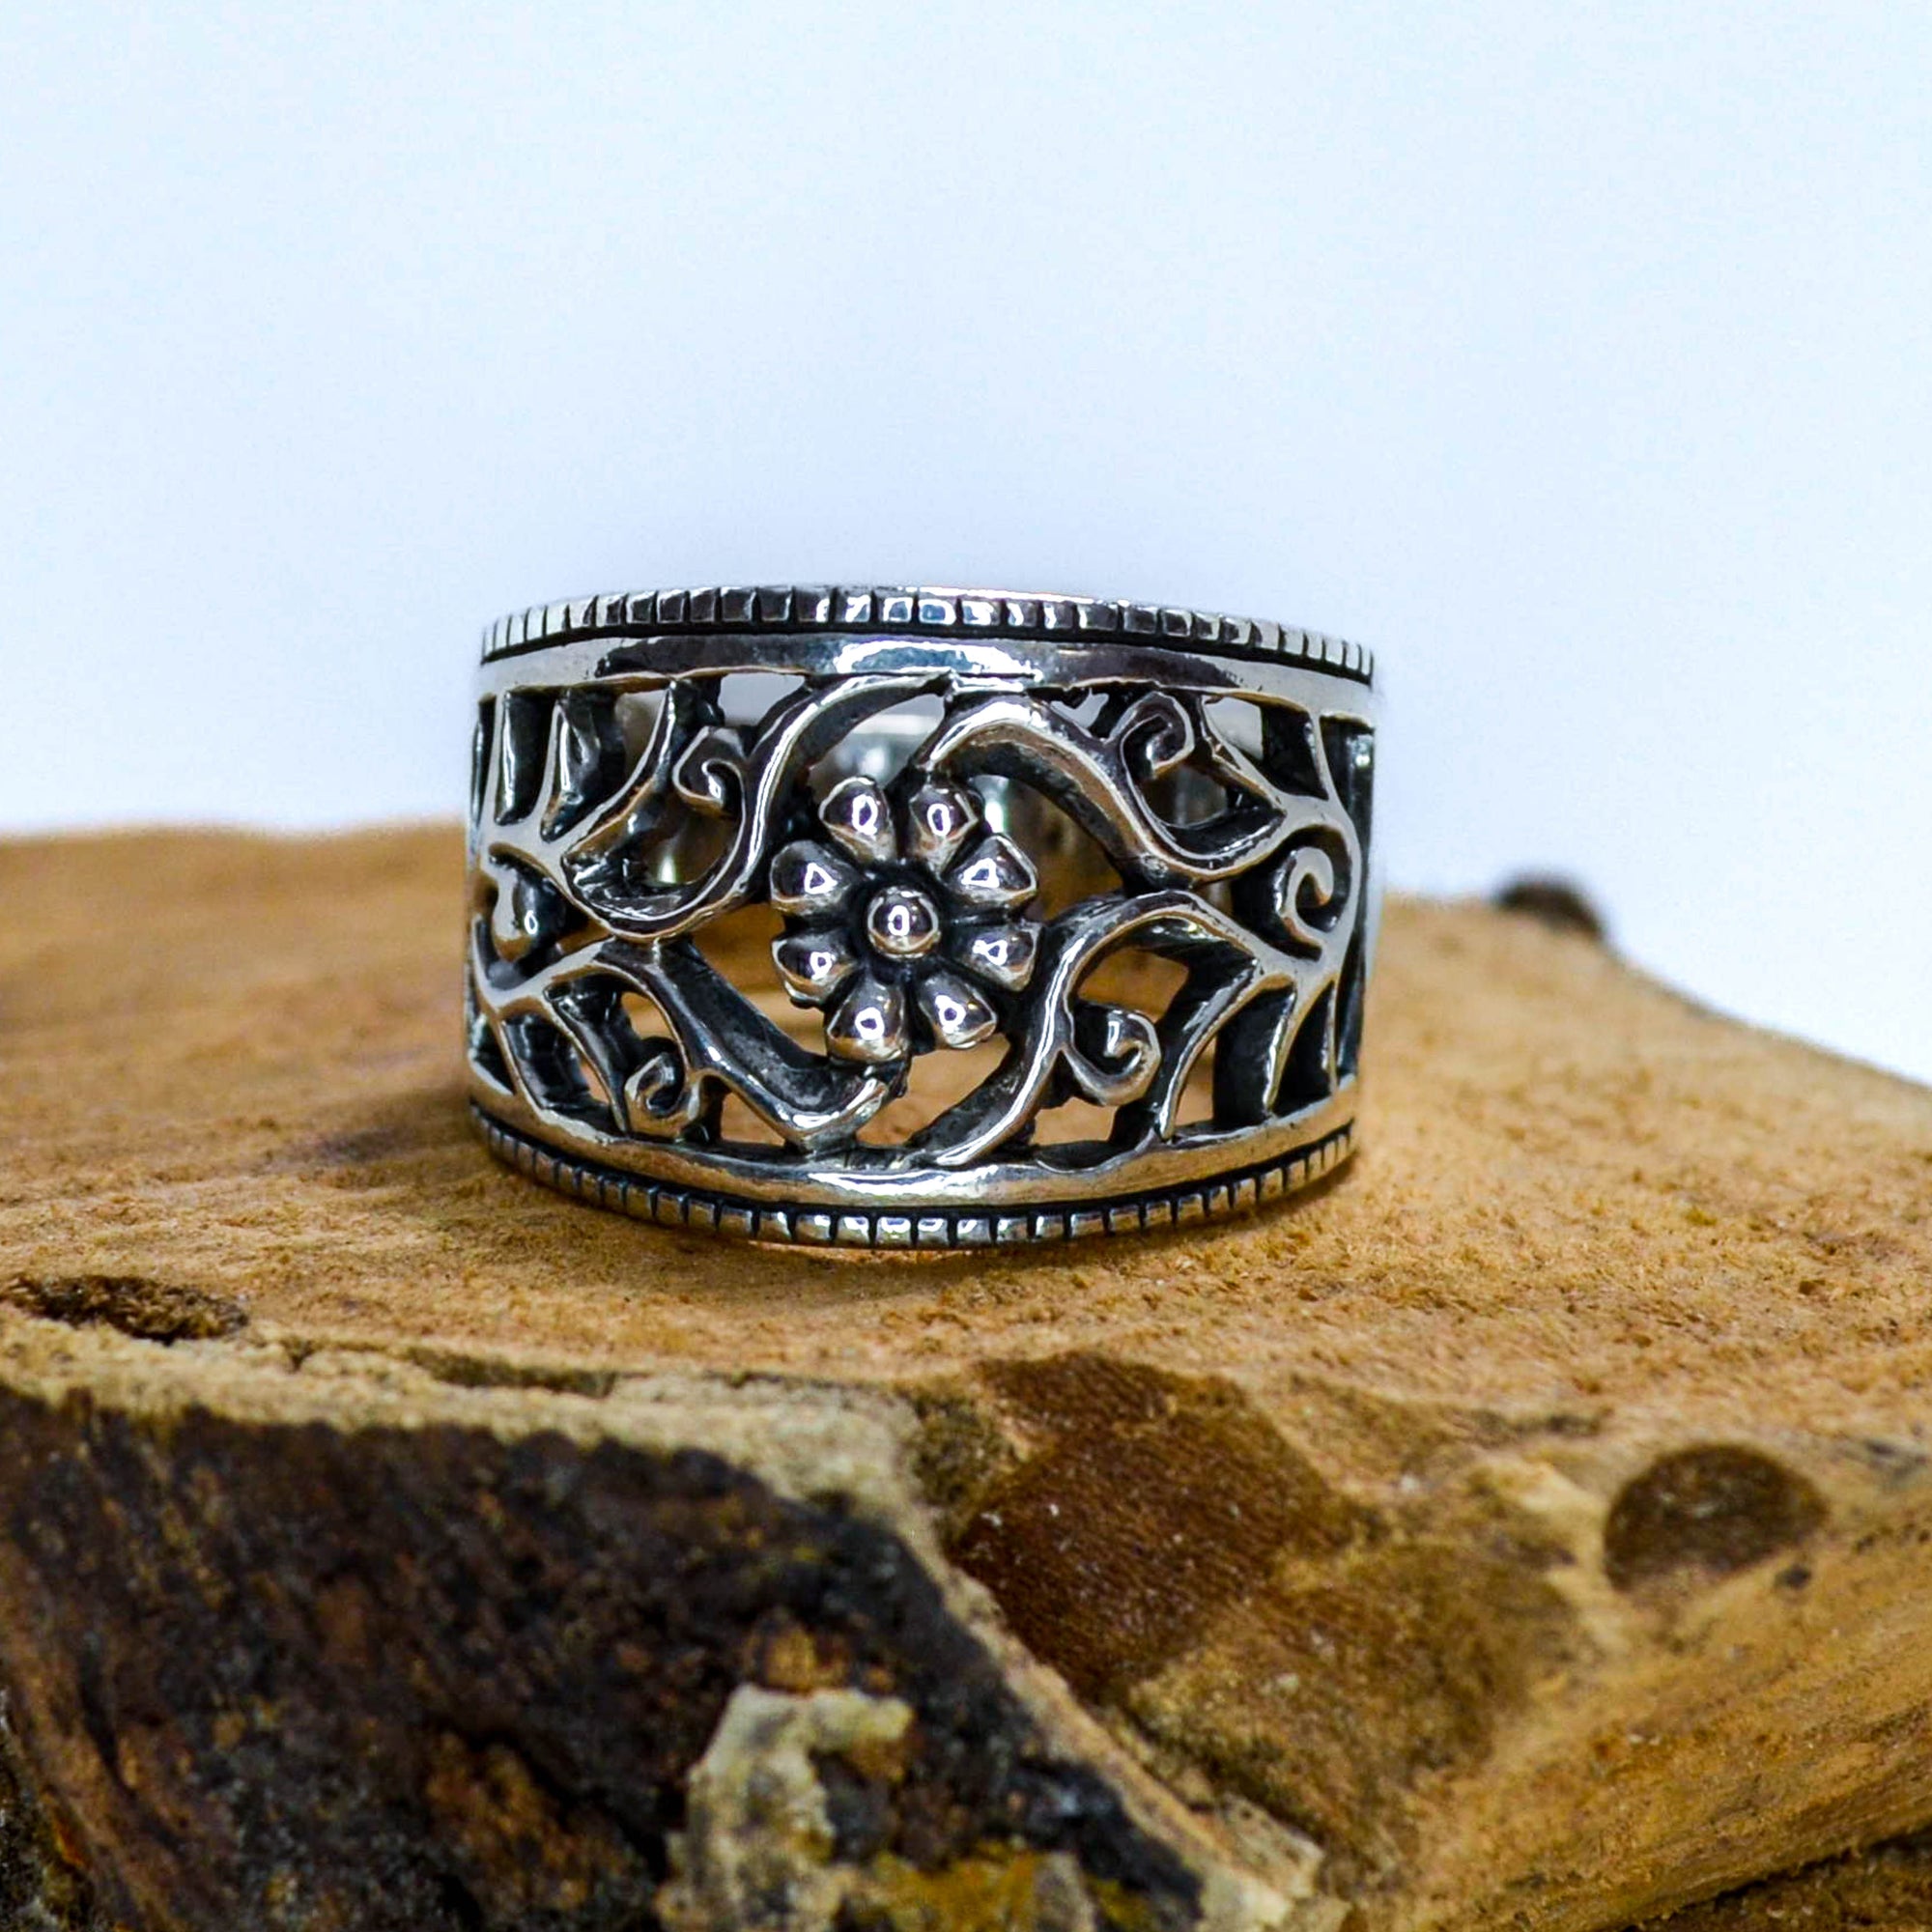 Ornate silver ring with a small flower in the center sitting on wood